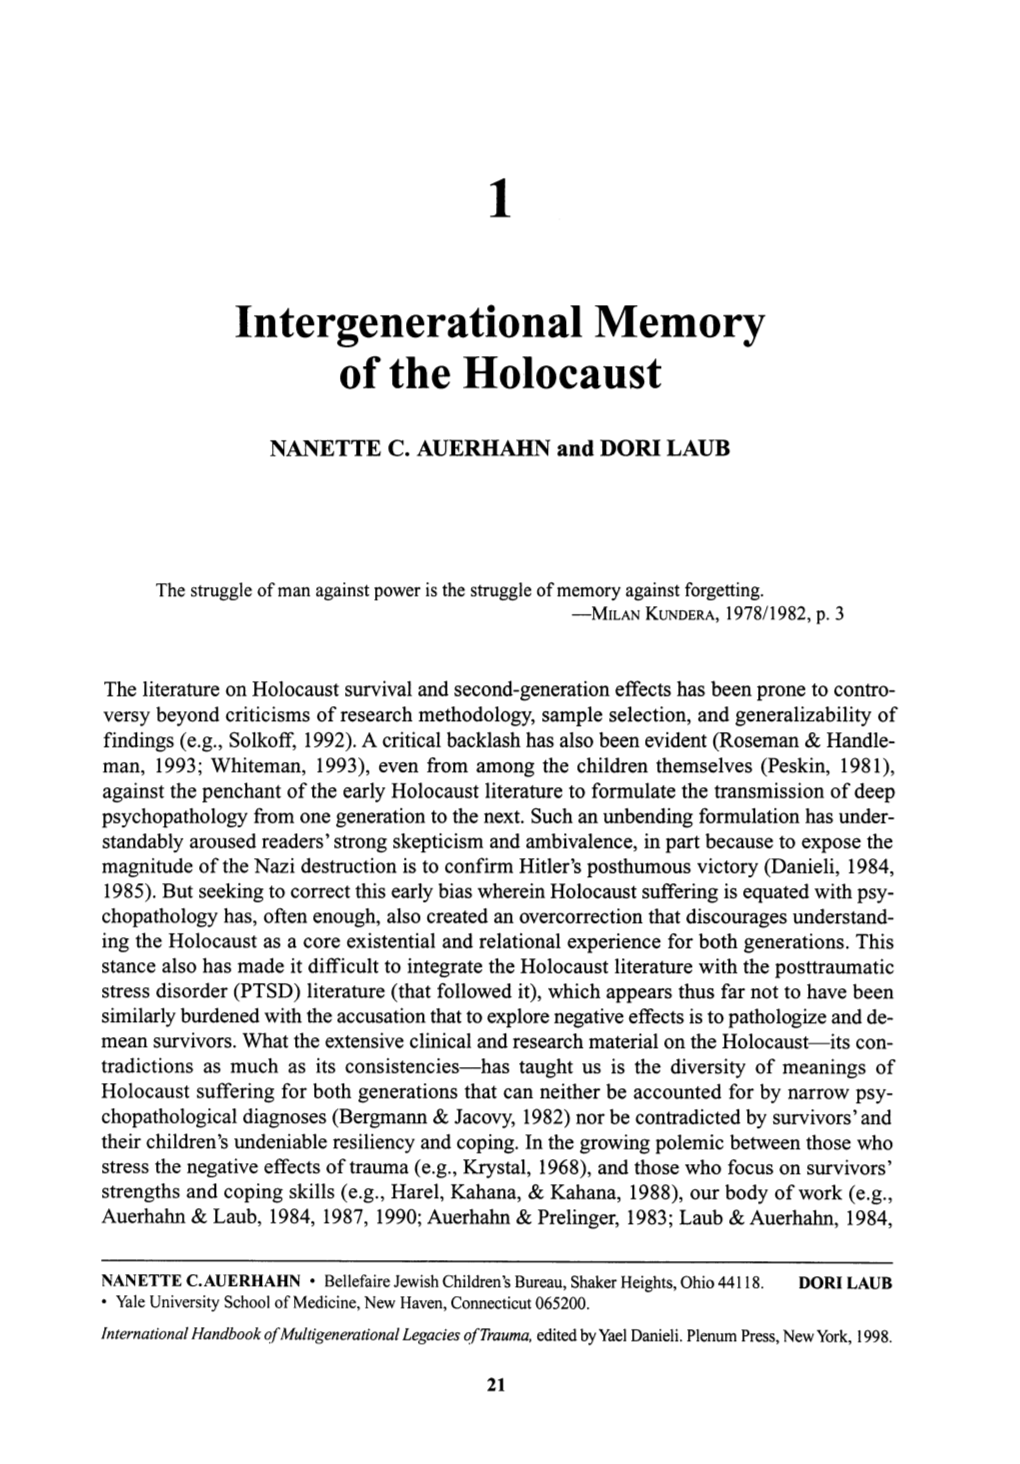 Chapter 1. Intergenerational Memory of the Holocaust